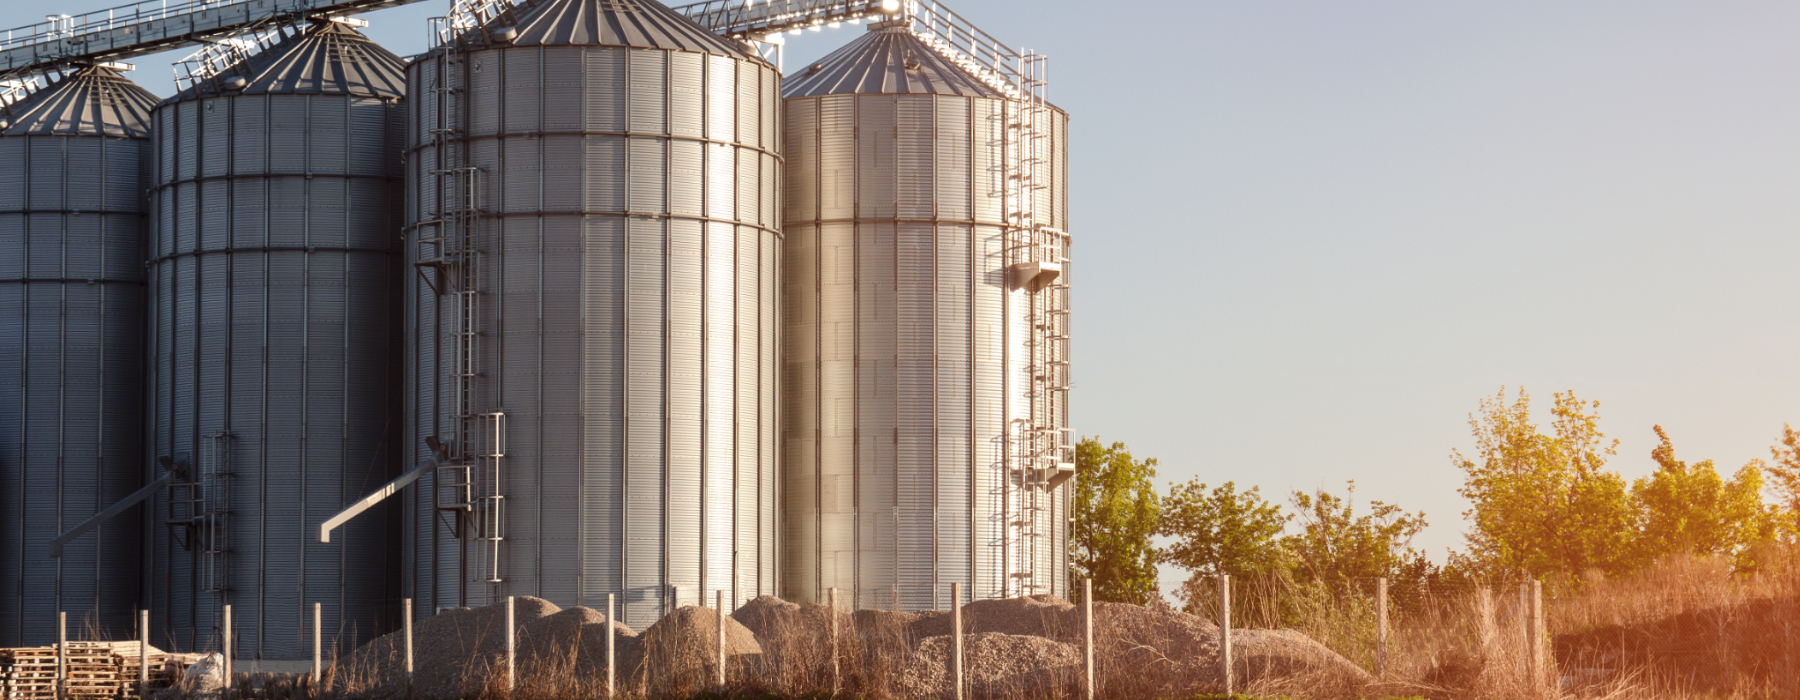 Silo Construction 101: 5 Things To Know